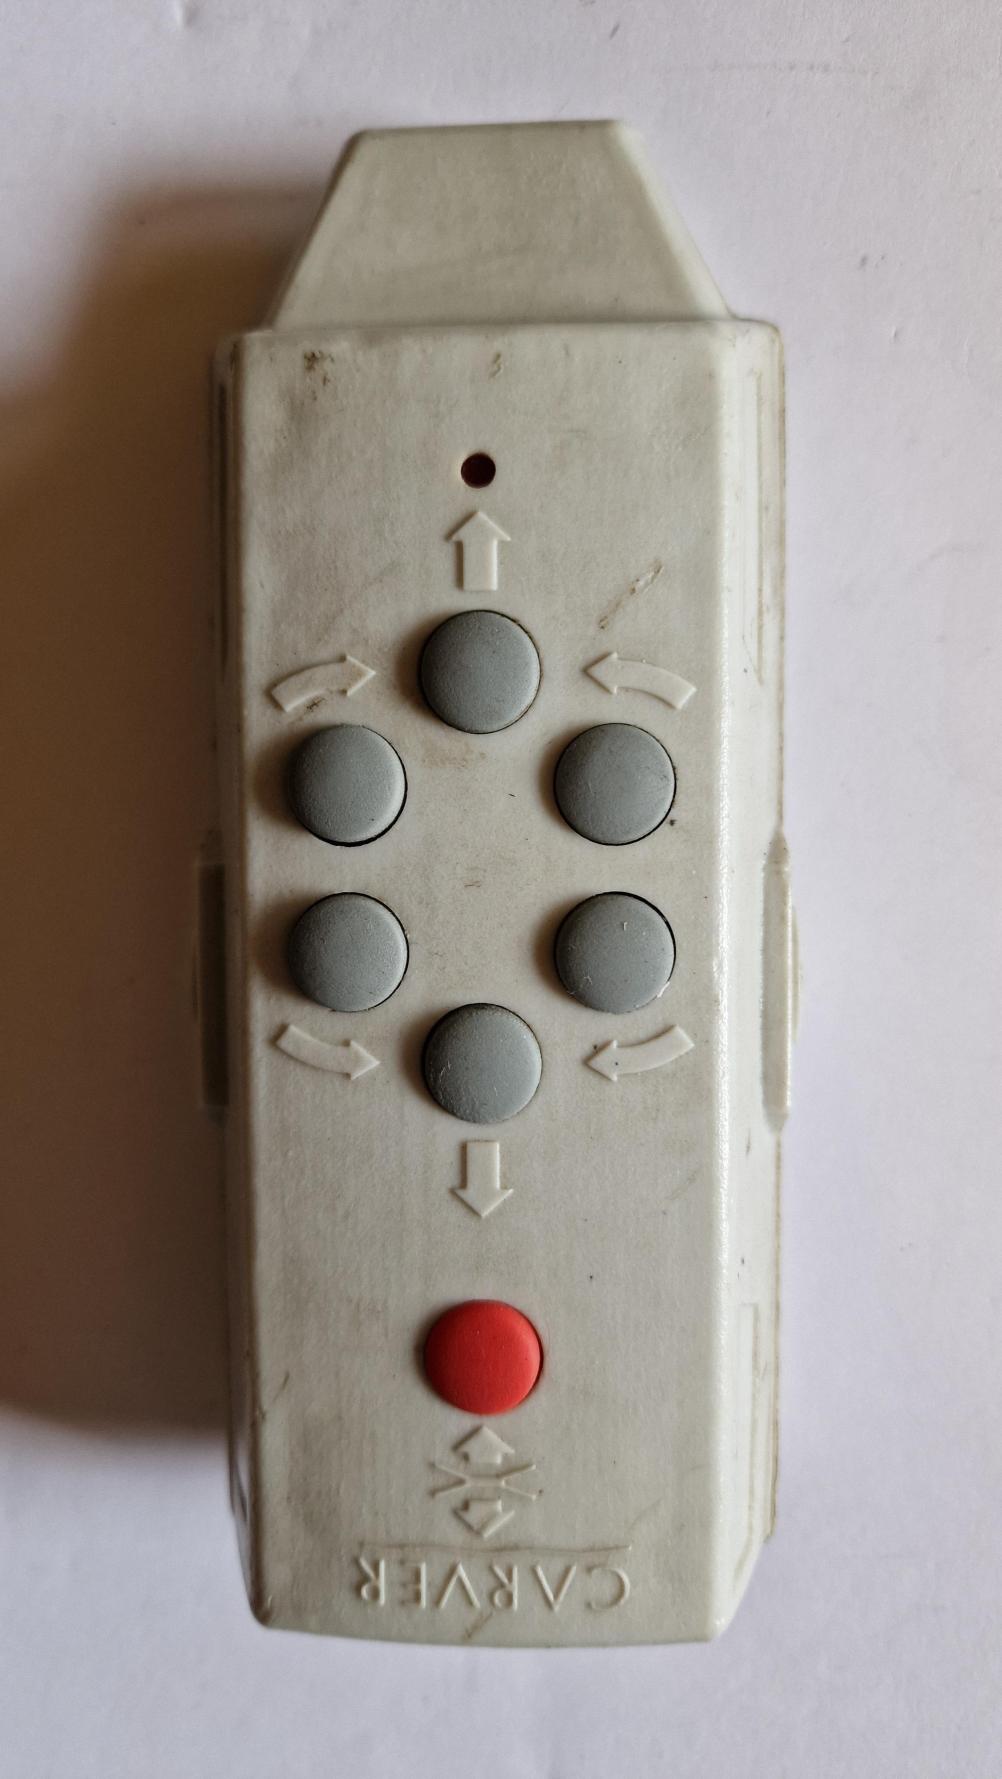 Carver  Remote Control - Front Image